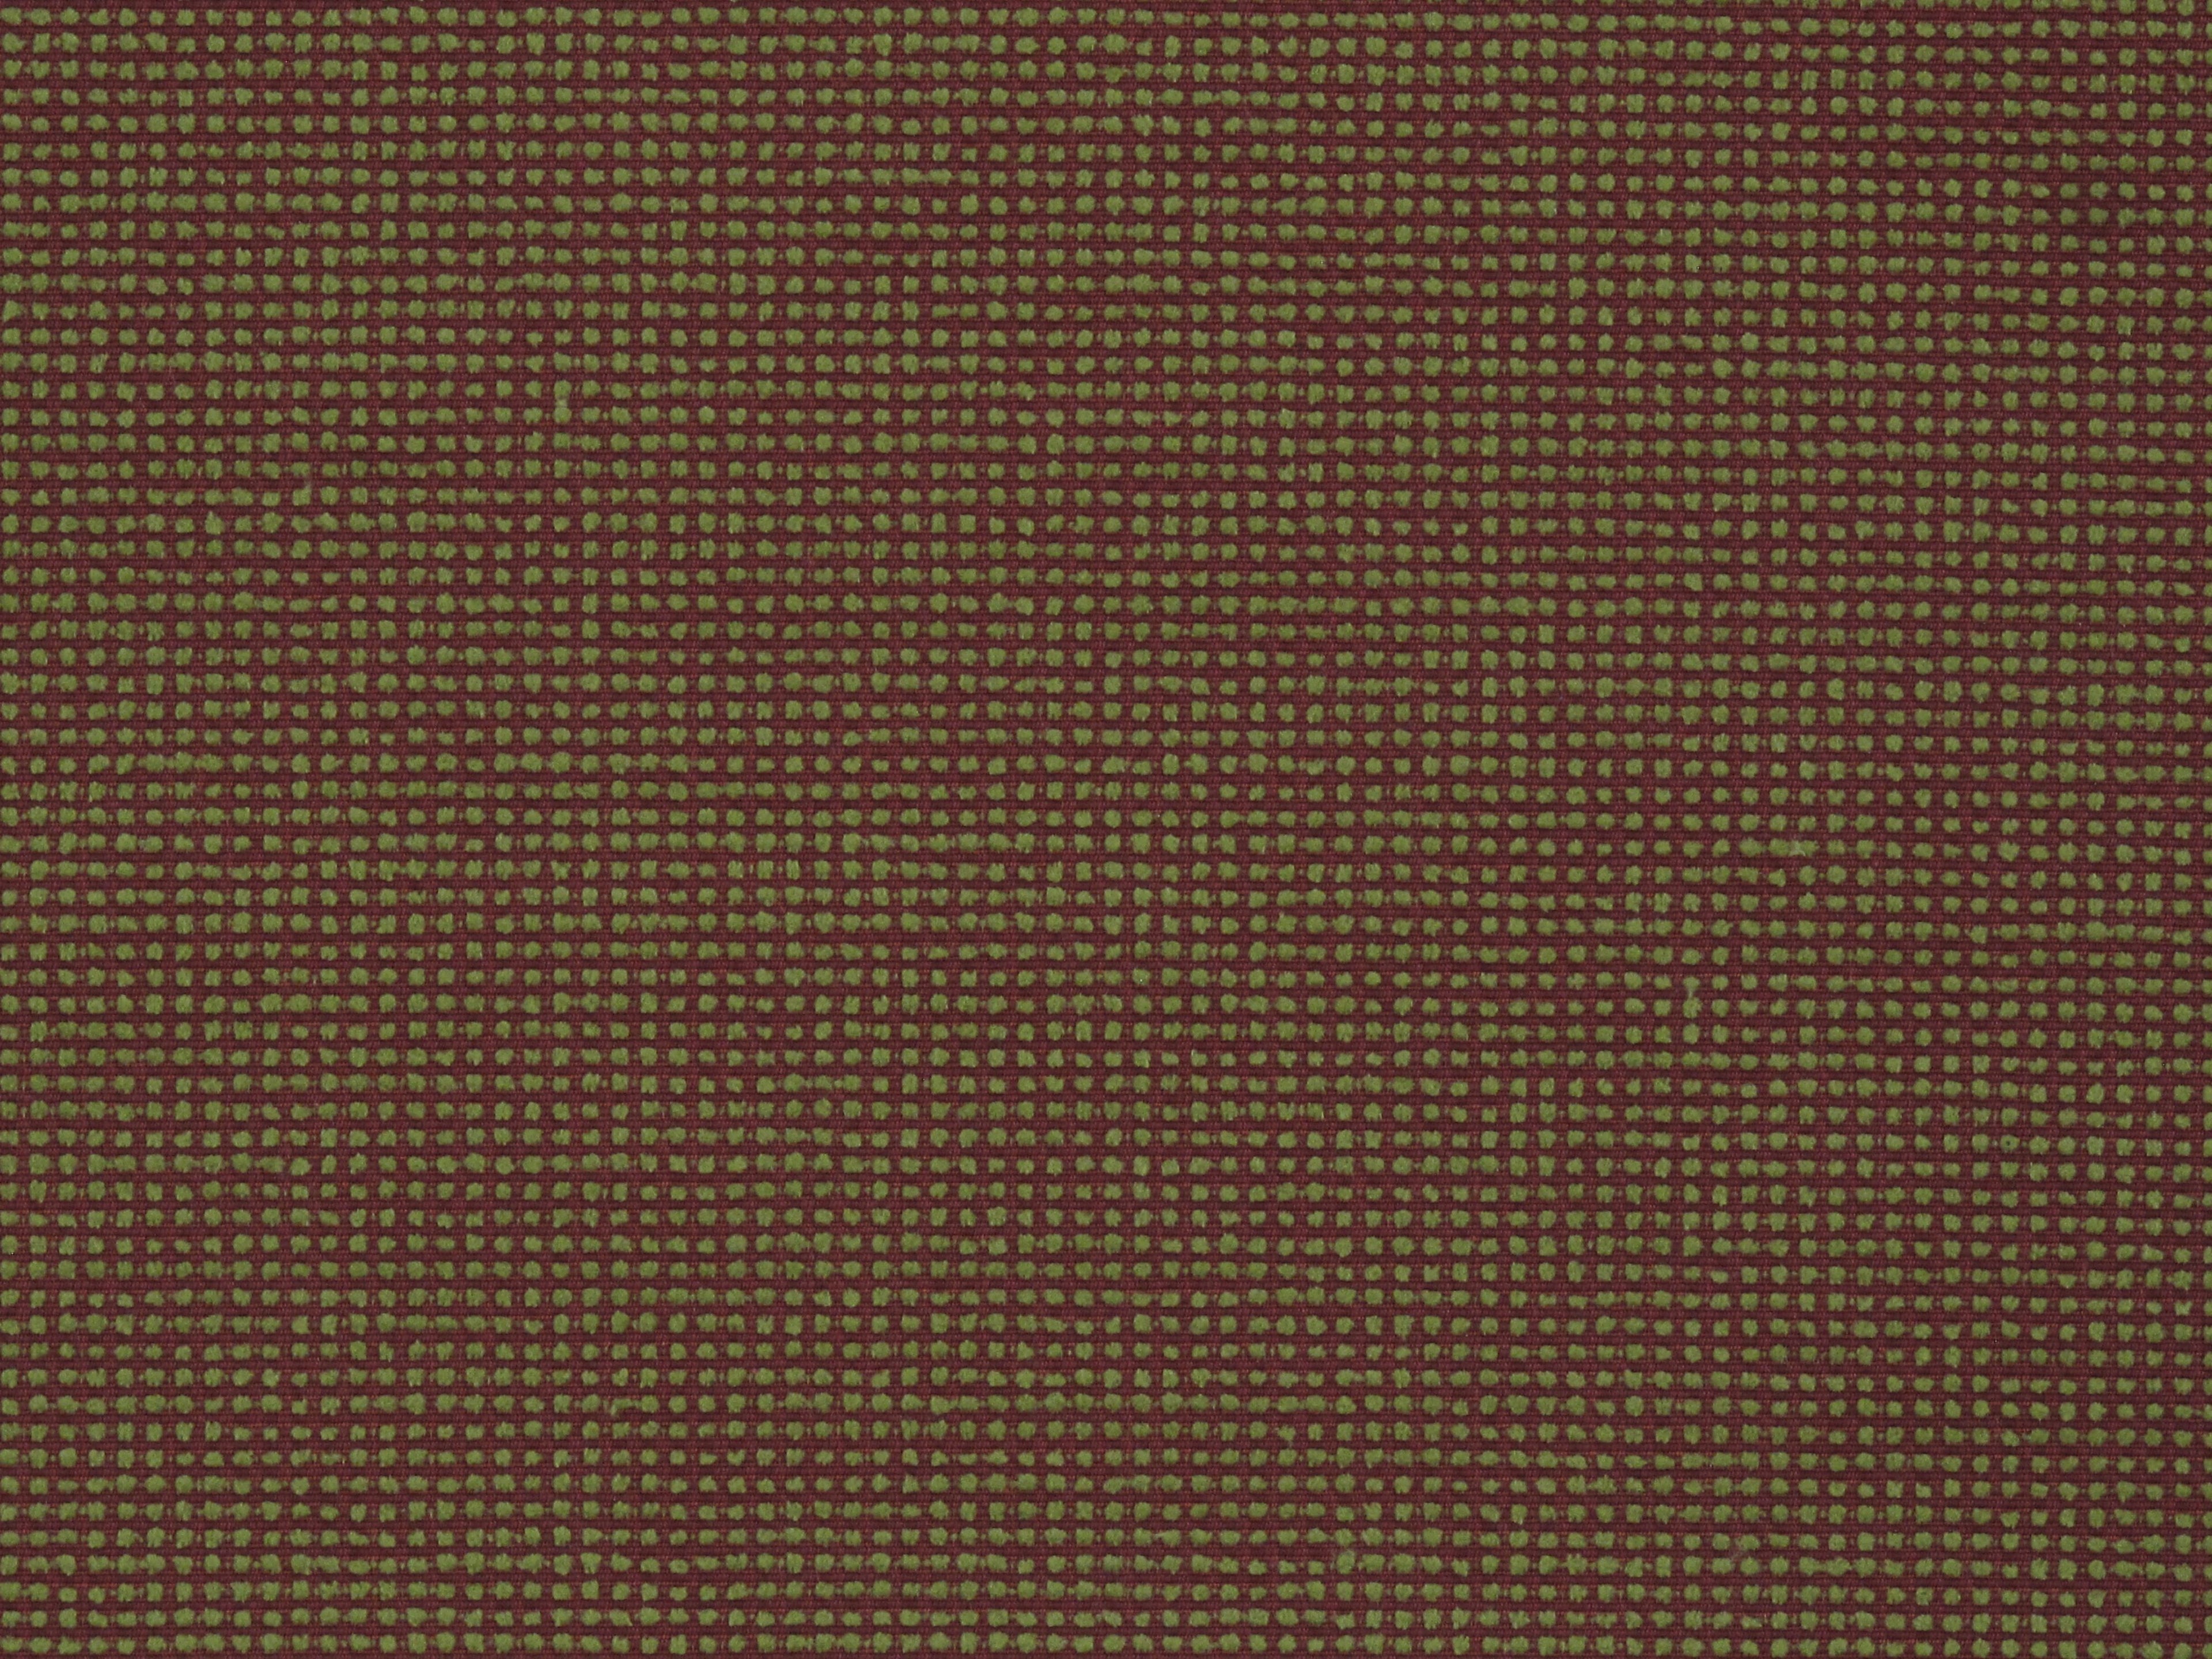 Telluride fabric in claret absinthe color - pattern number RH 00081291 - by Scalamandre in the Old World Weavers collection